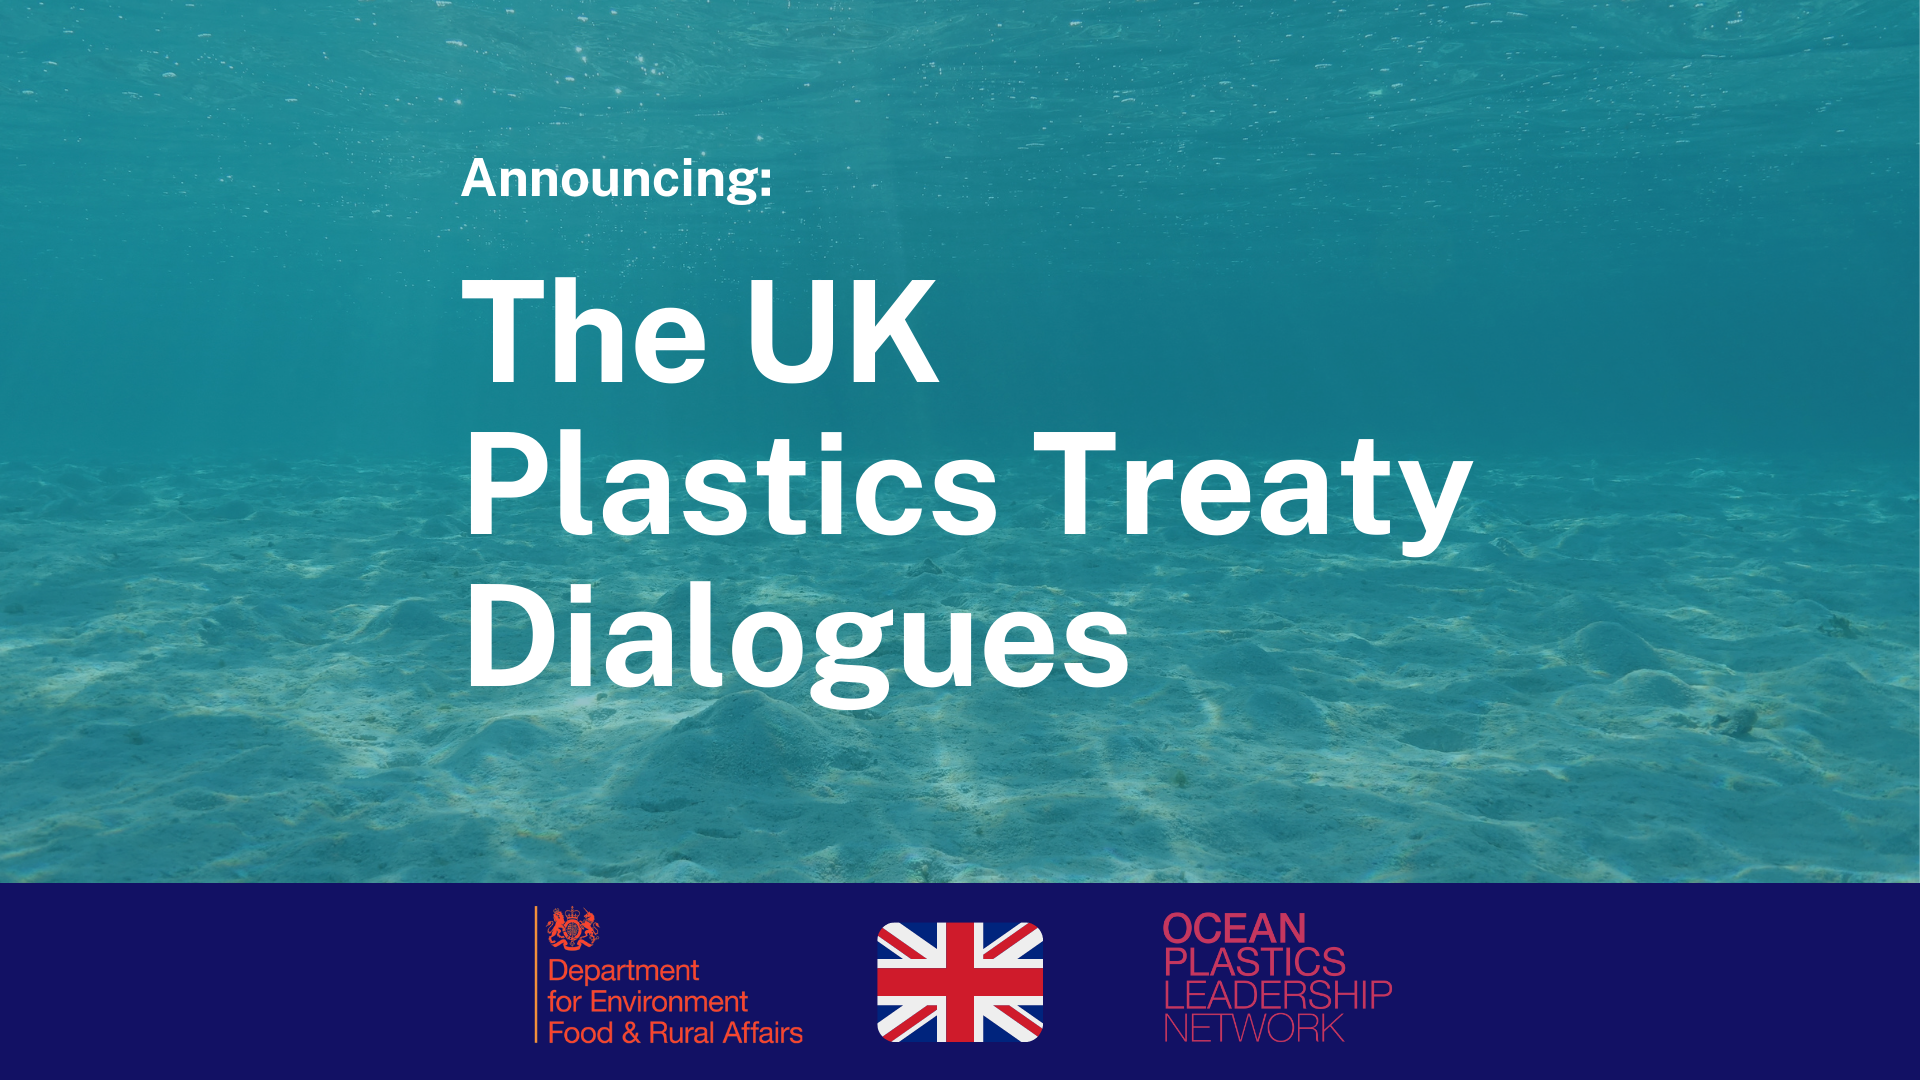 Just Announced: Defra and OPLN Will Hold the UK Plastics Treaty Dialogues 